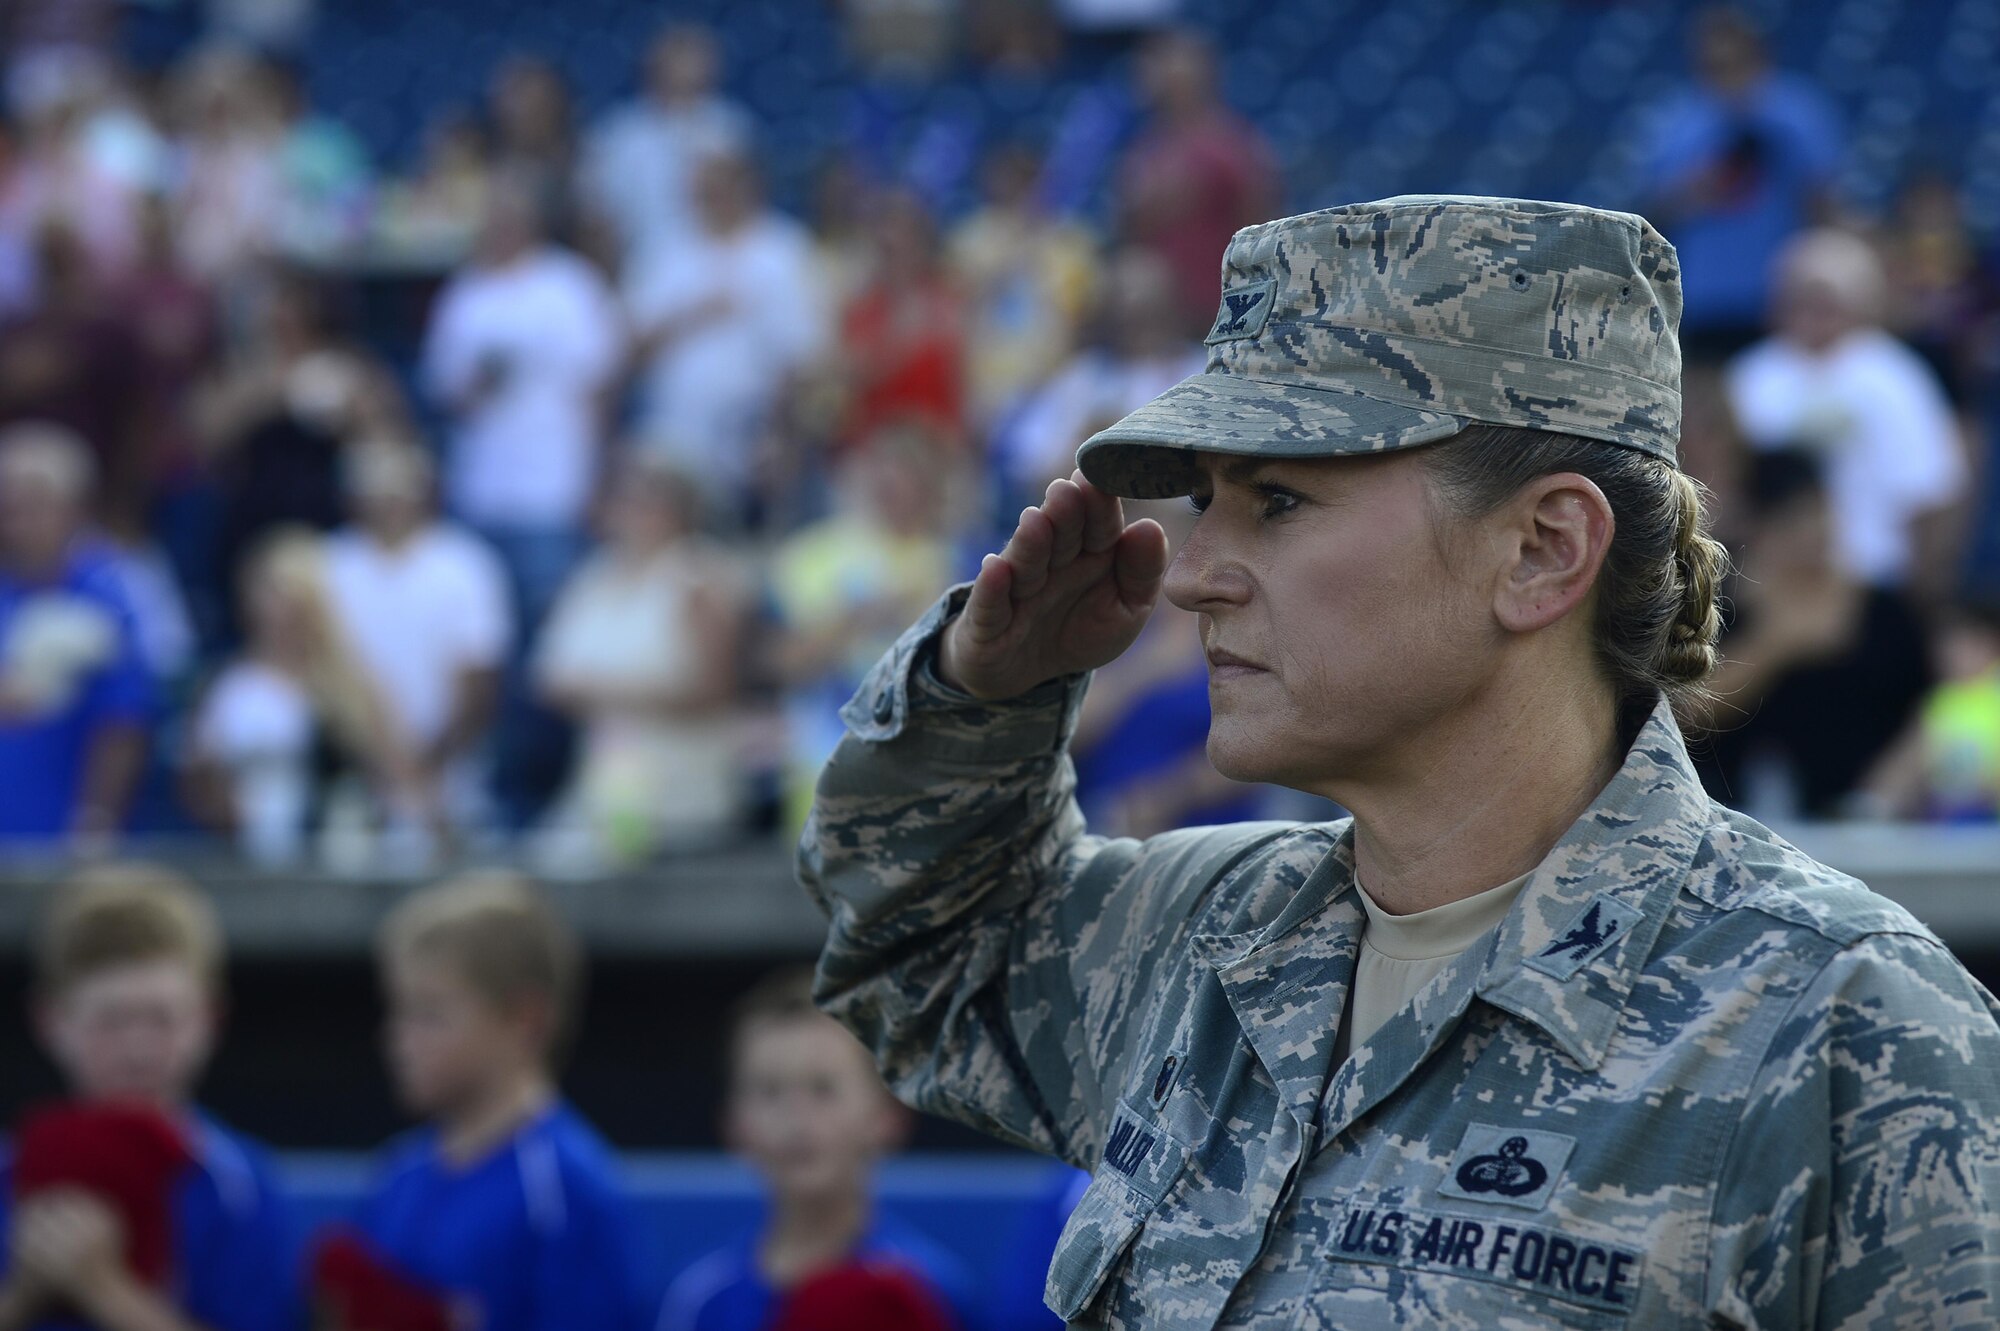 U.S. Air Force Col. Caroline Miller, 633rd Air Base Wing commander, renders a salute as the Air Combat Command Heritage of America Band plays “The Star-Spangled Banner” at the Norfolk Tides Air Force Appreciation Night baseball game in Norfolk, Va., July 23, 2016. The event was held to honor Joint Base Langley-Eustis in celebration of 100 years of Air Power over Hampton Roads at Langley Air Force Base. (U.S. Air Force photo by Airman 1st Class Kaylee Dubois)